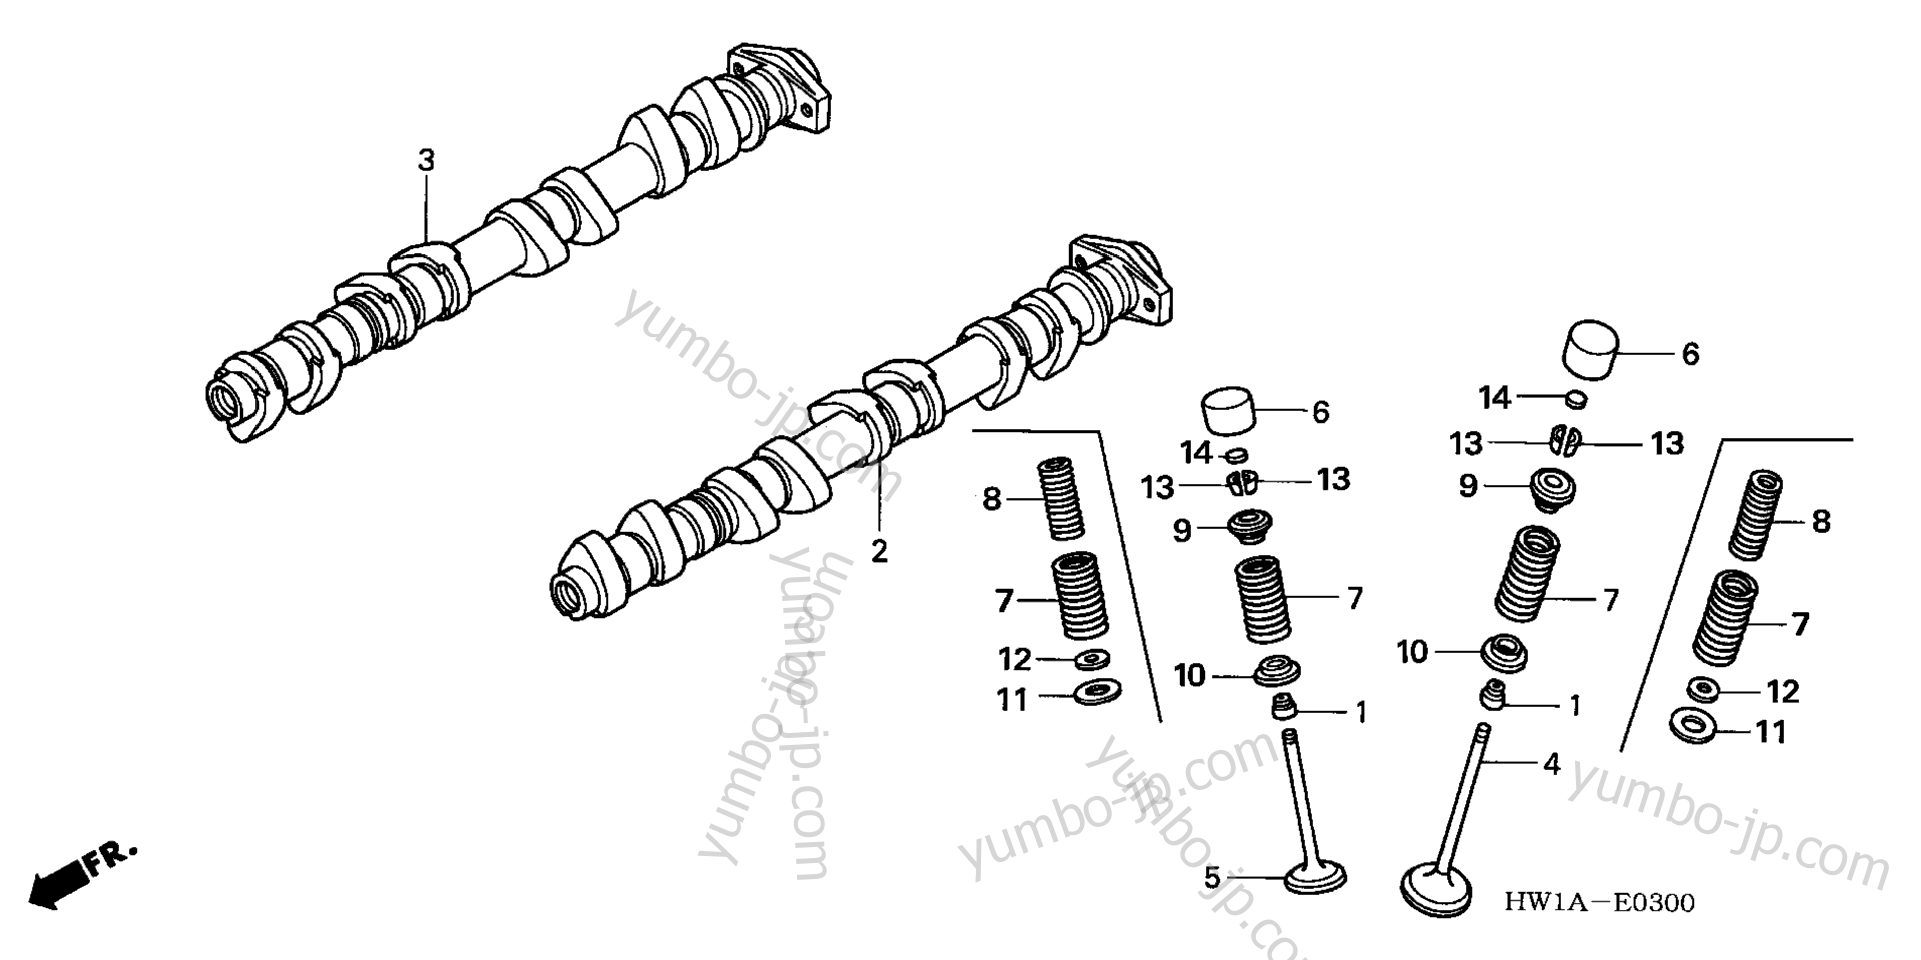 CAMSHAFT / VALVE for watercrafts HONDA ARX1200T3 A 2007 year